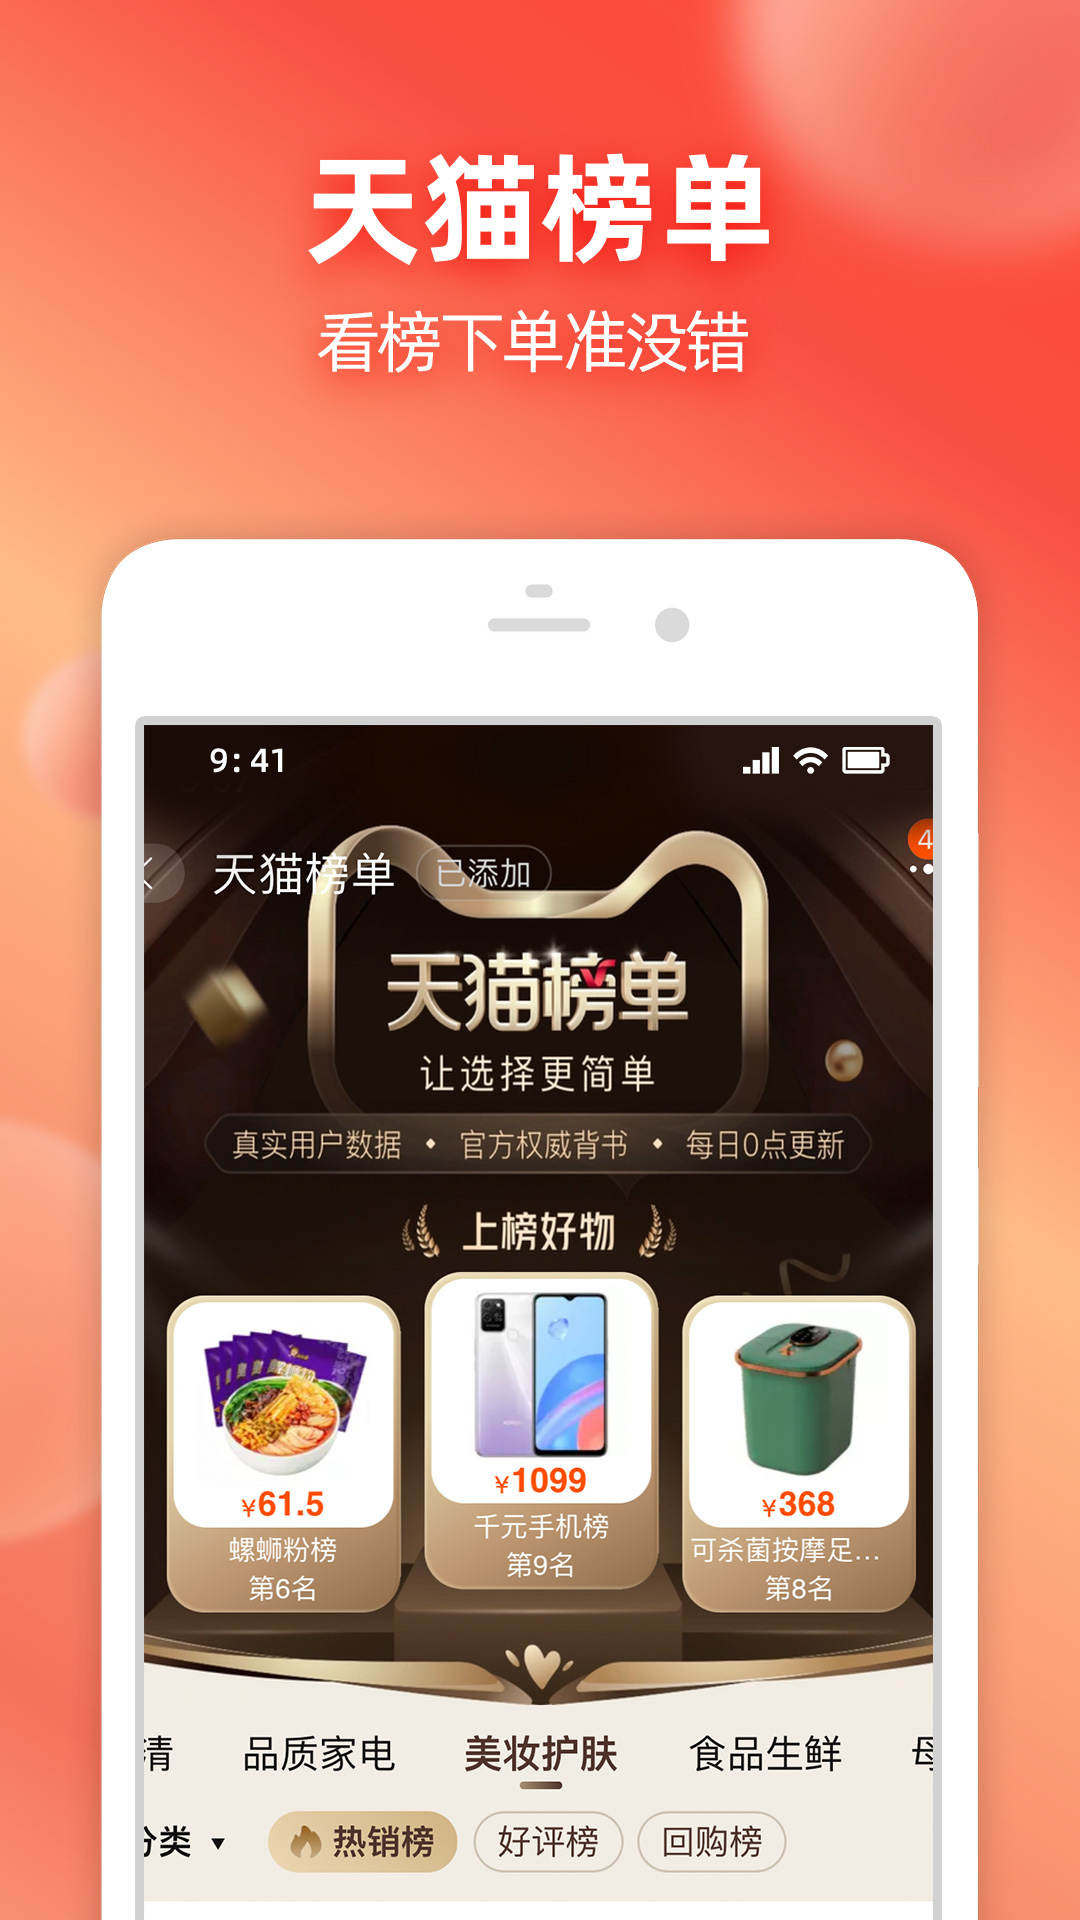 Android application 淘宝 screenshort